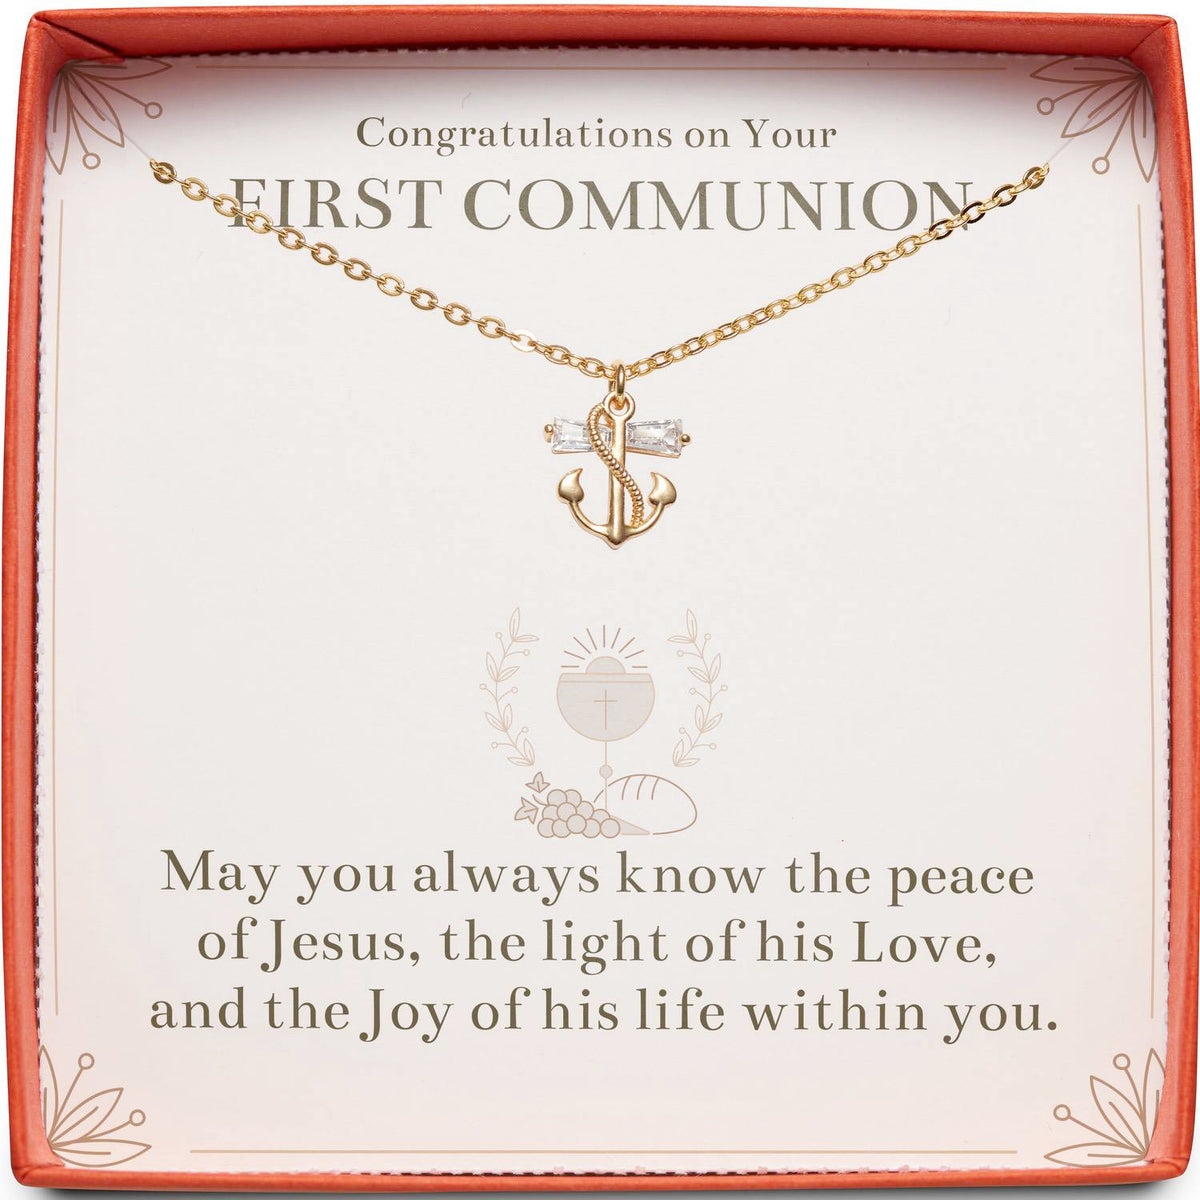 Congratulations on Your First Communion | Peace of Jesus | Anchor Necklace